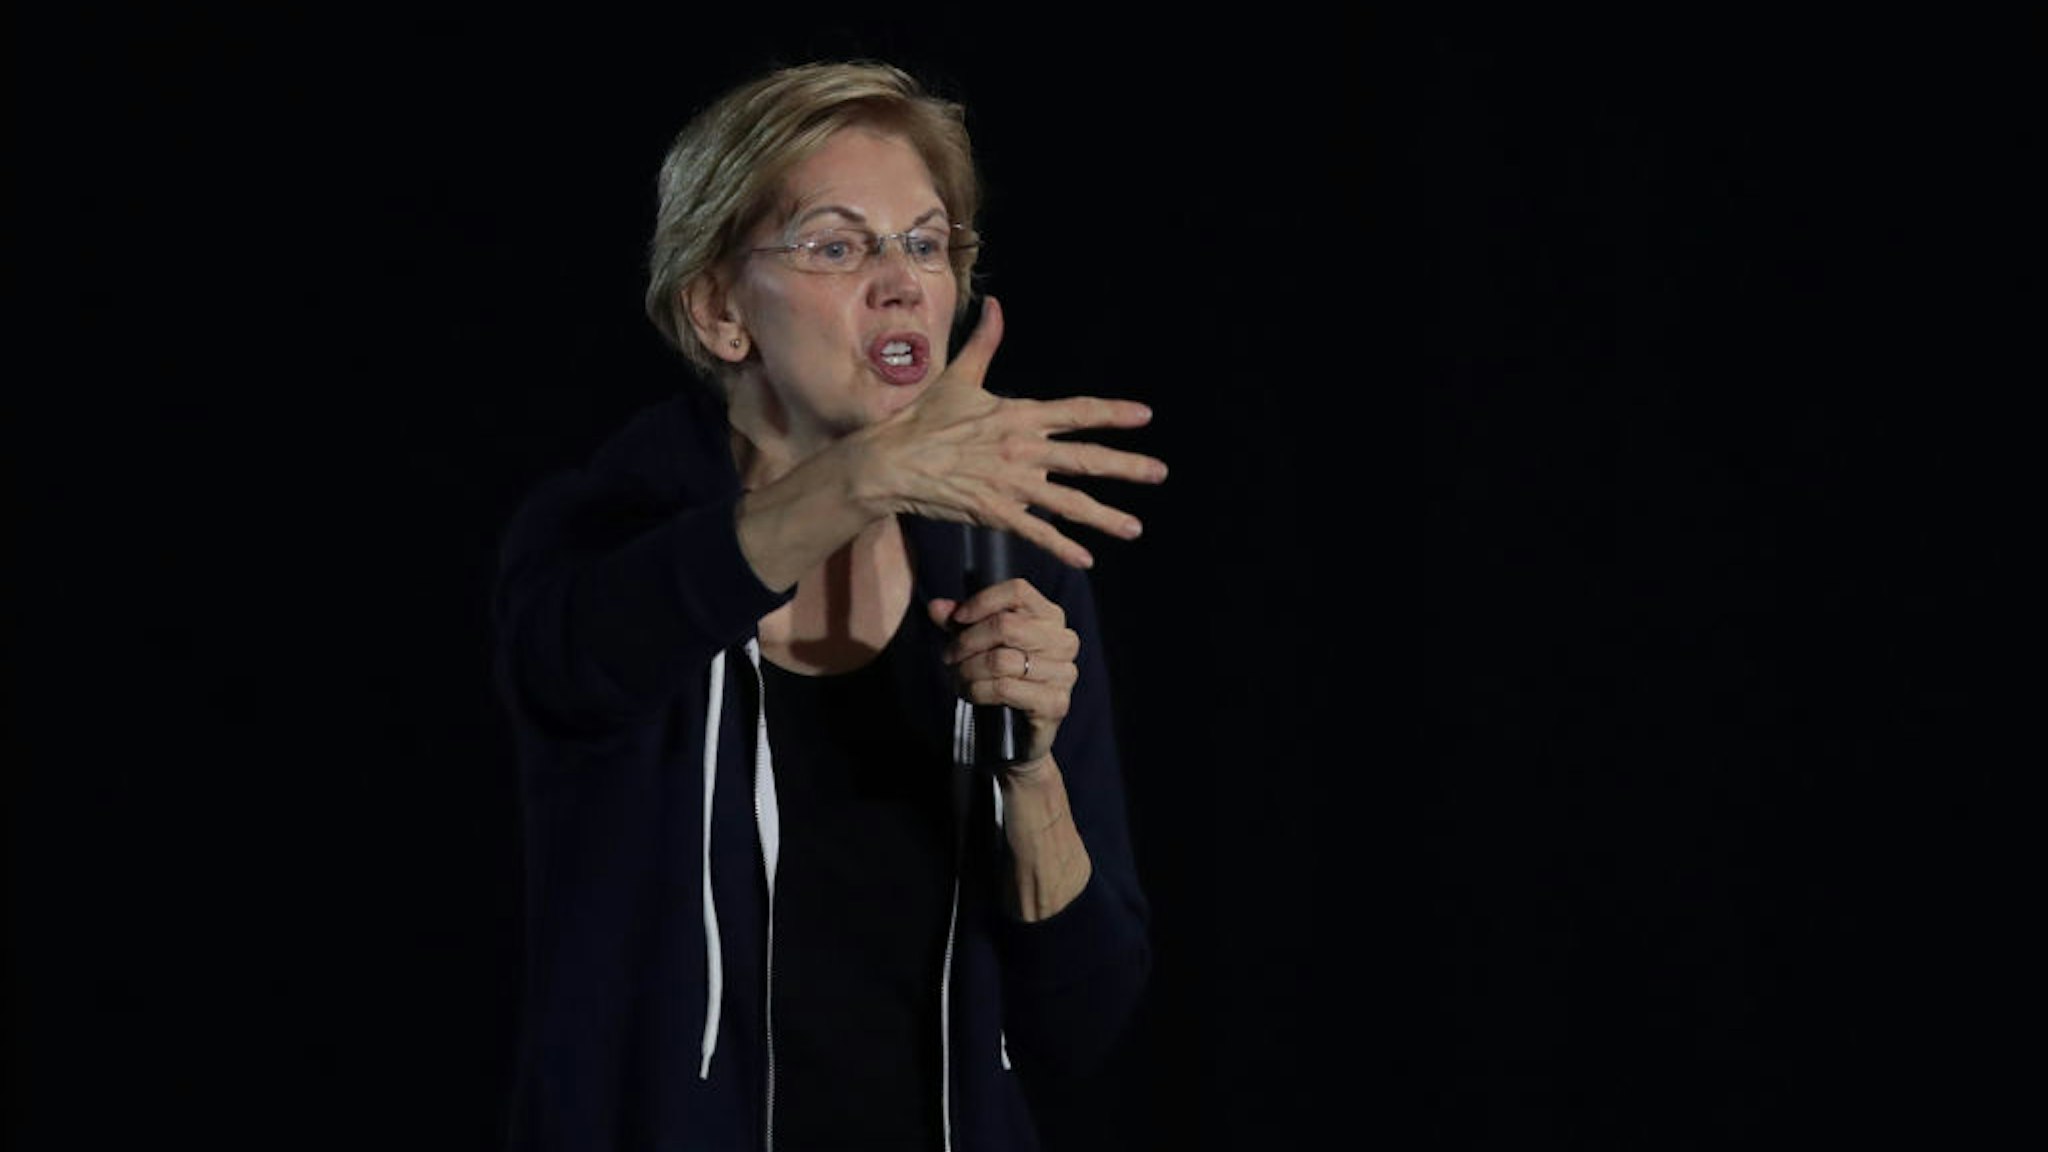 Democratic presidential candidate Sen. Elizabeth Warren (D-MA) speaks to guests during a campaign stop at the Val Air Ballroom on November 25, 2019 in West Des Moines, Iowa.